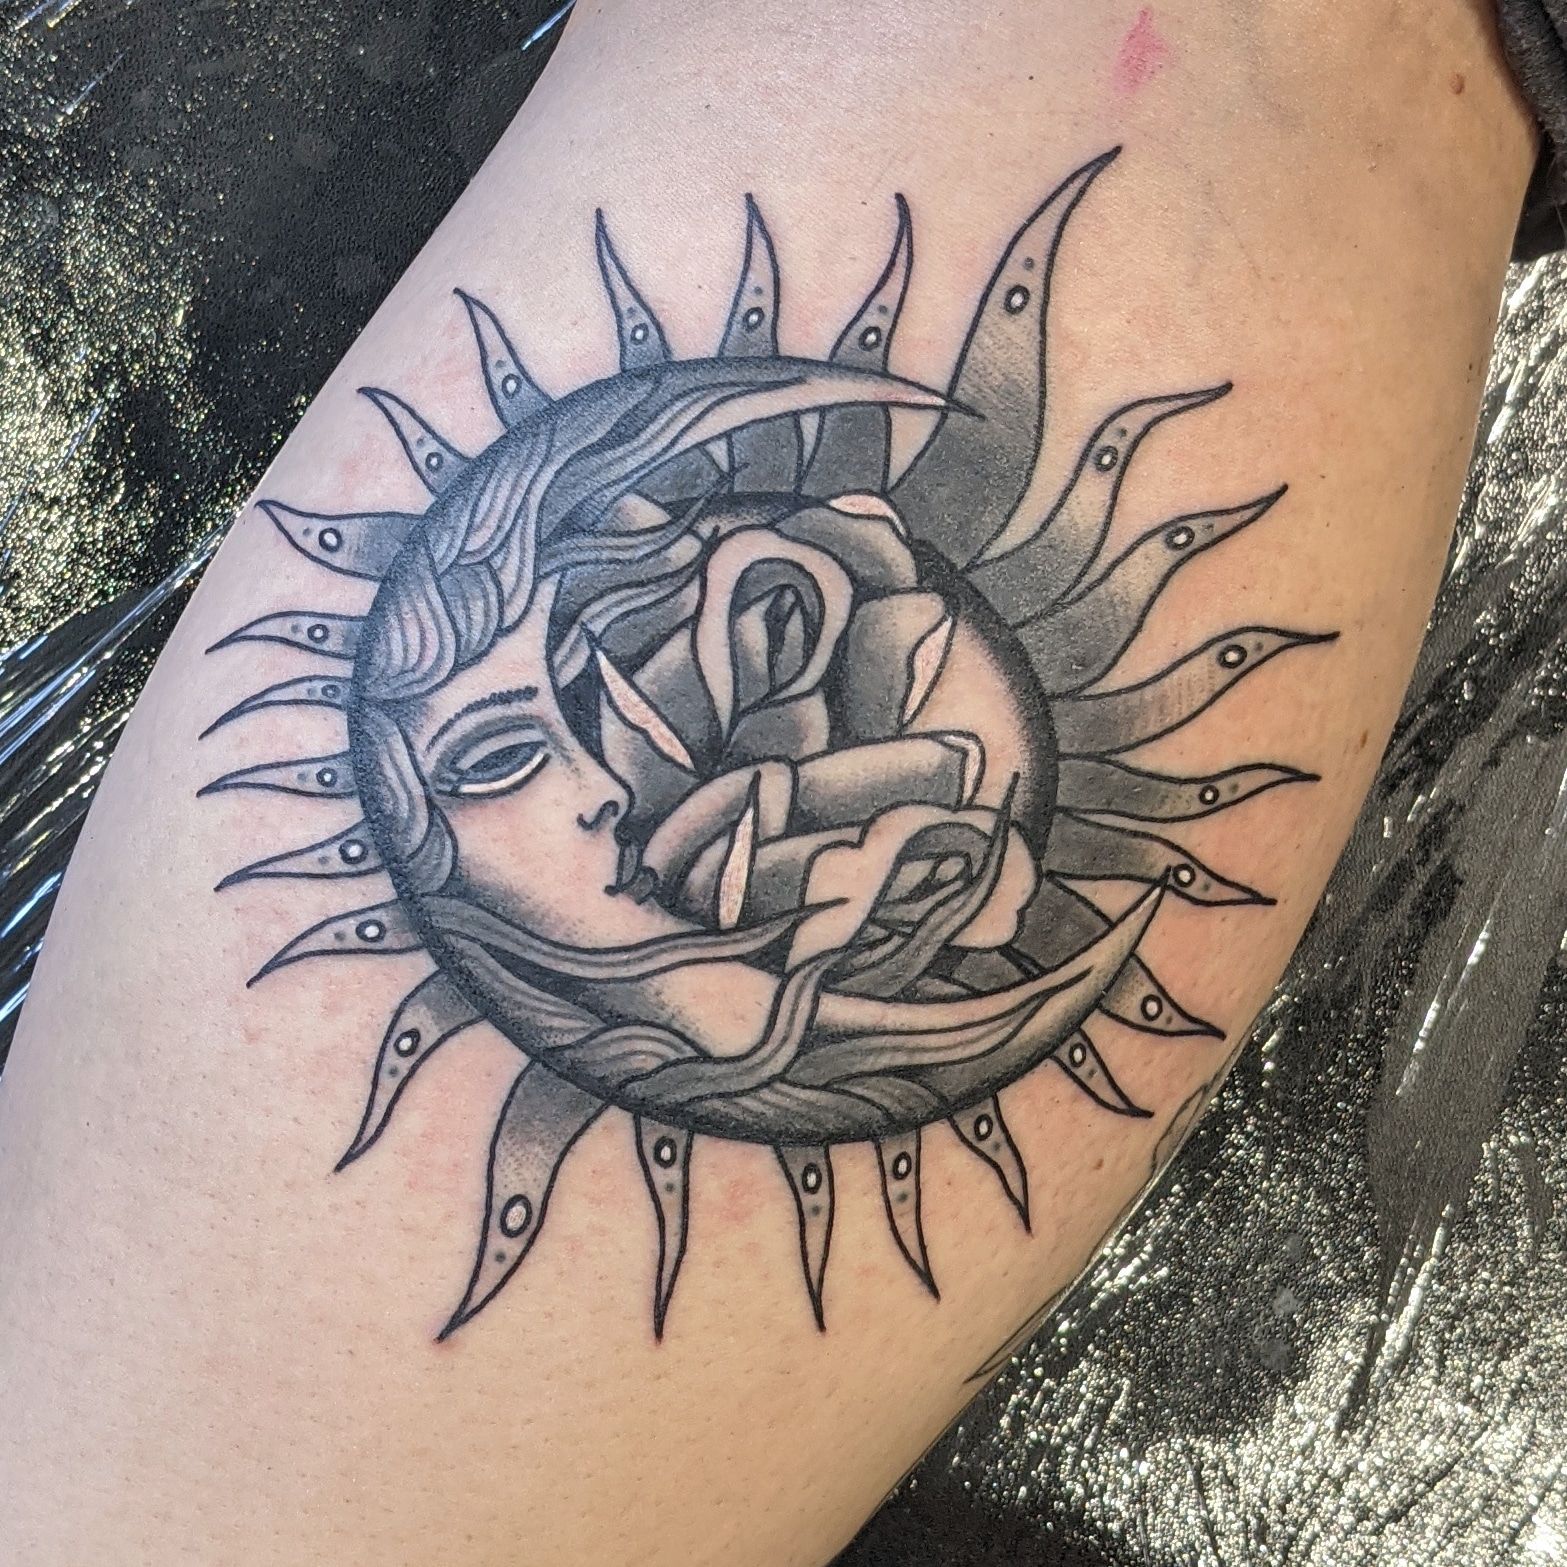 Details more than 77 solar cross tattoo latest - in.coedo.com.vn